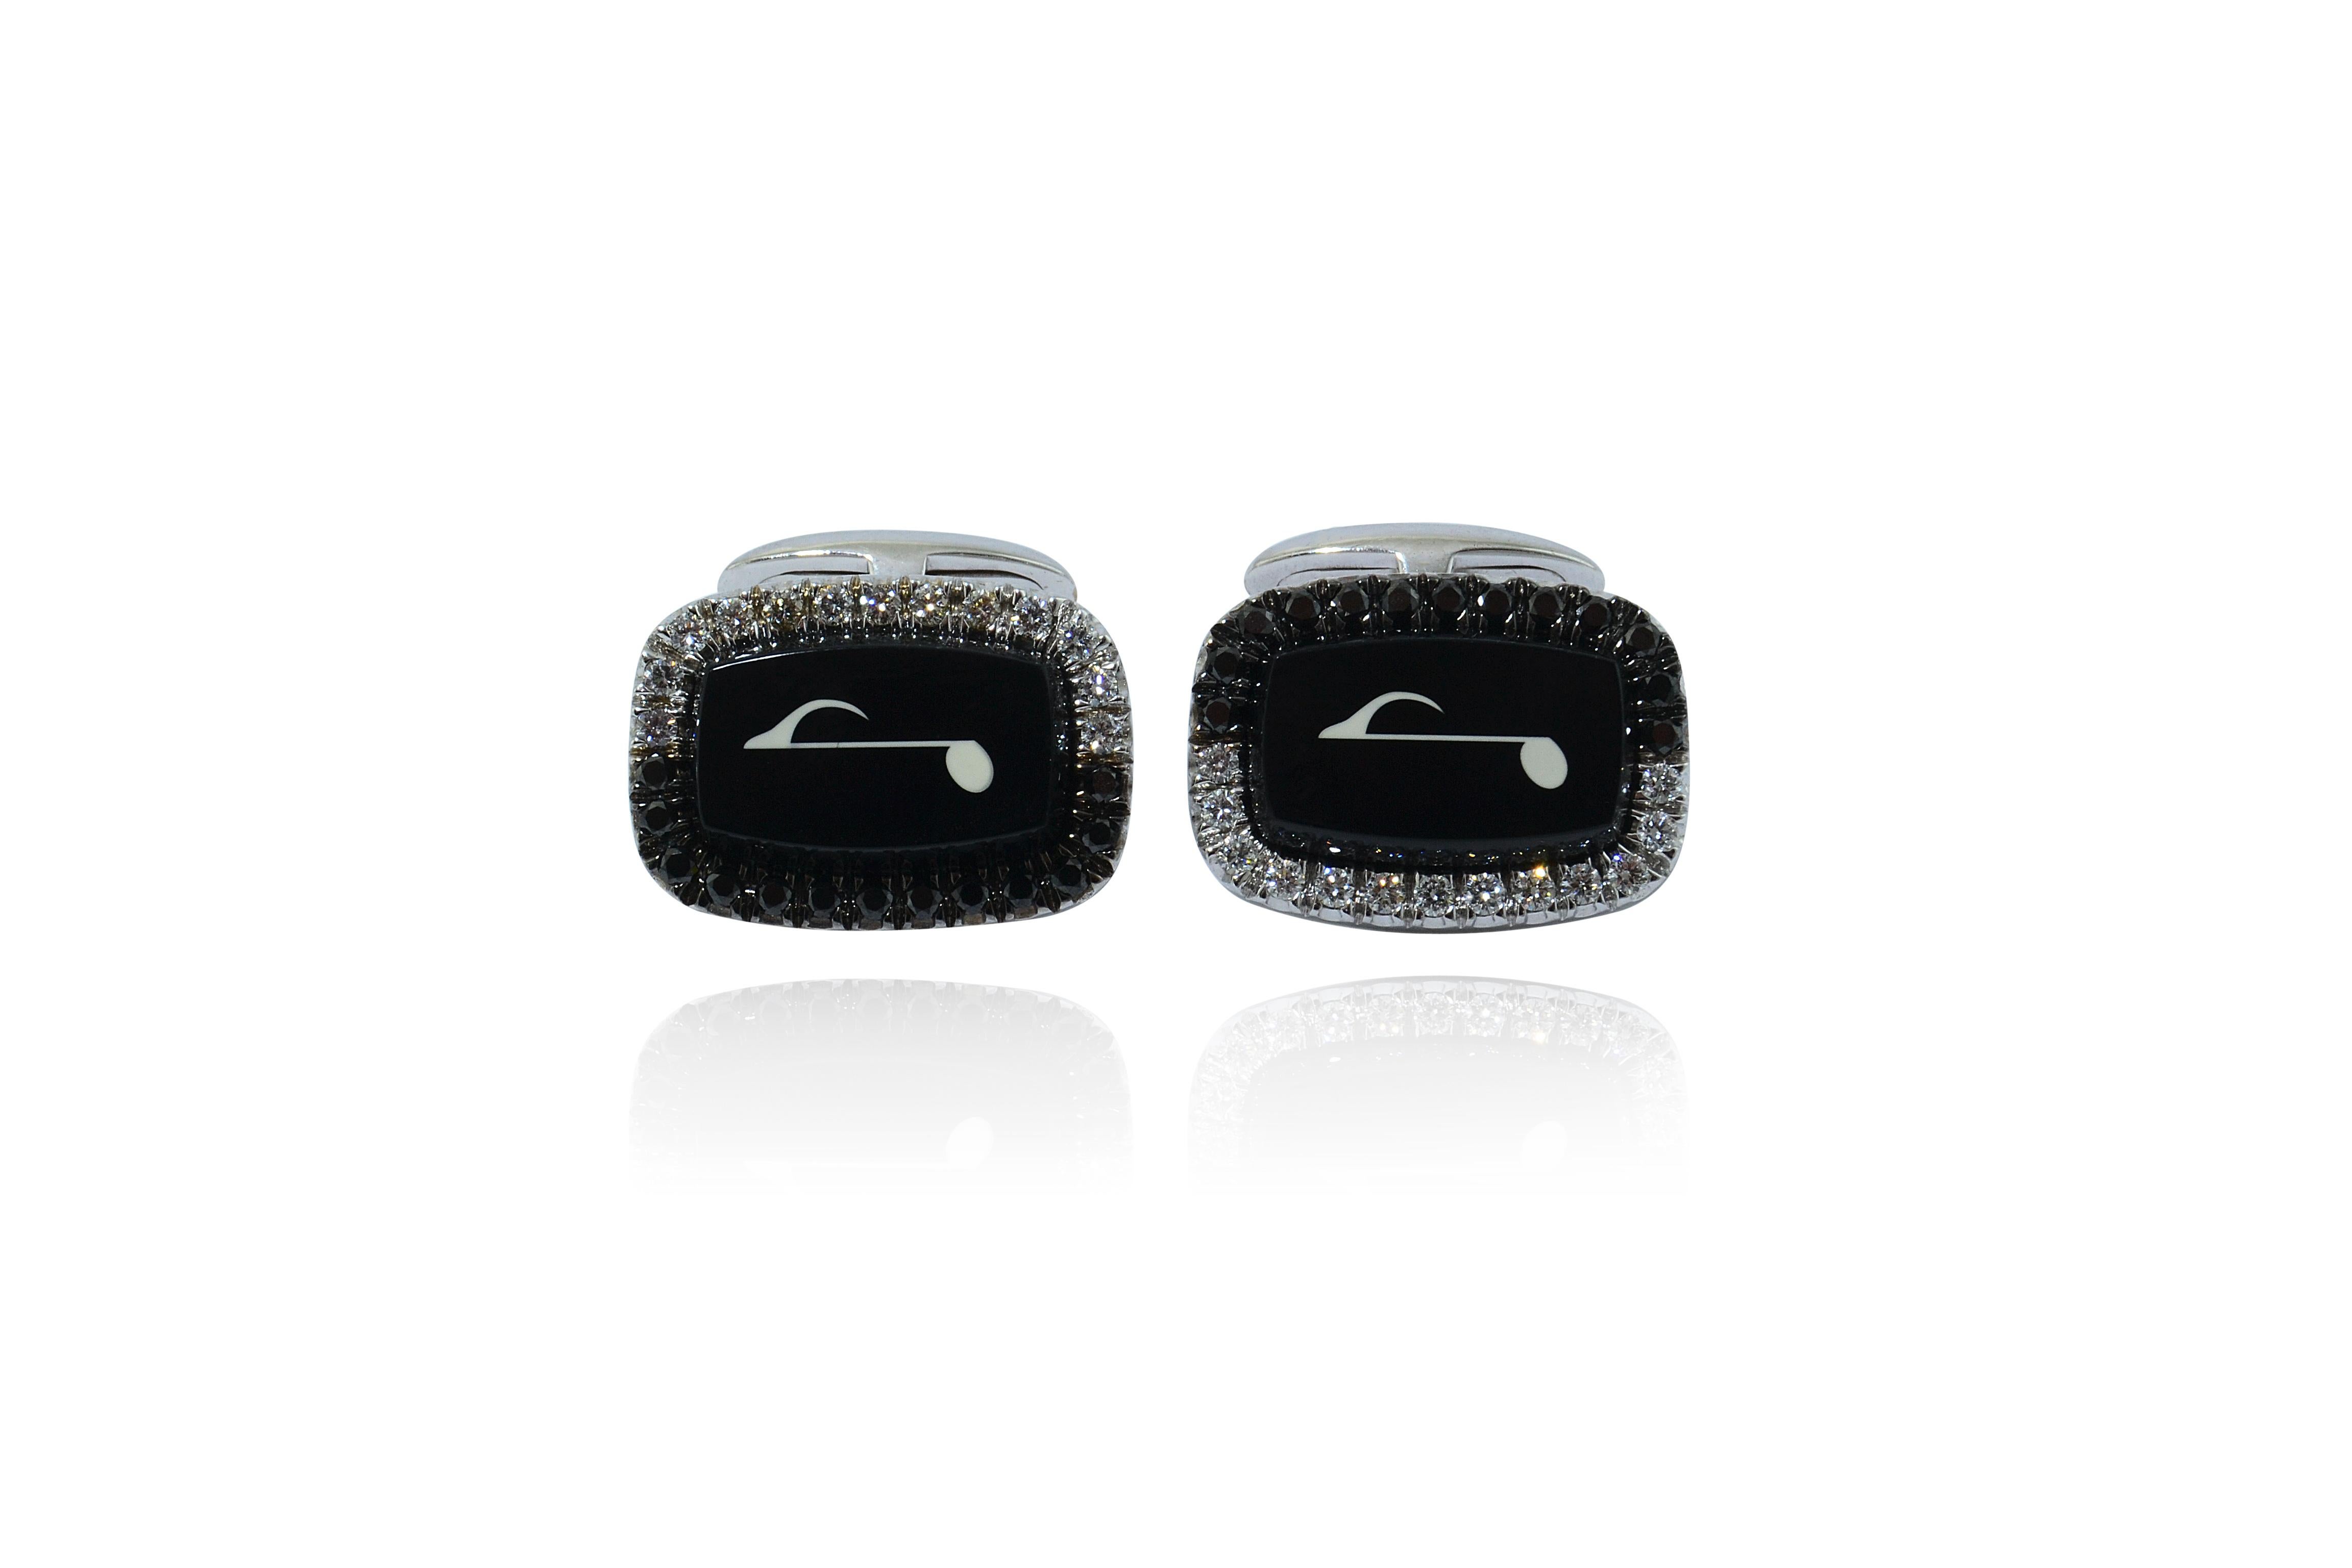 Handcrafted in Italy, the pair of cufflinks features a onyx base centering a design made by round colorless diamonds and one black diamonds

Cufflinks w gold g 17,50 - n.26 diam. ct 0,49 - n.26 black diam. ct 0,53 - onix g 3,37

the T bar is plane